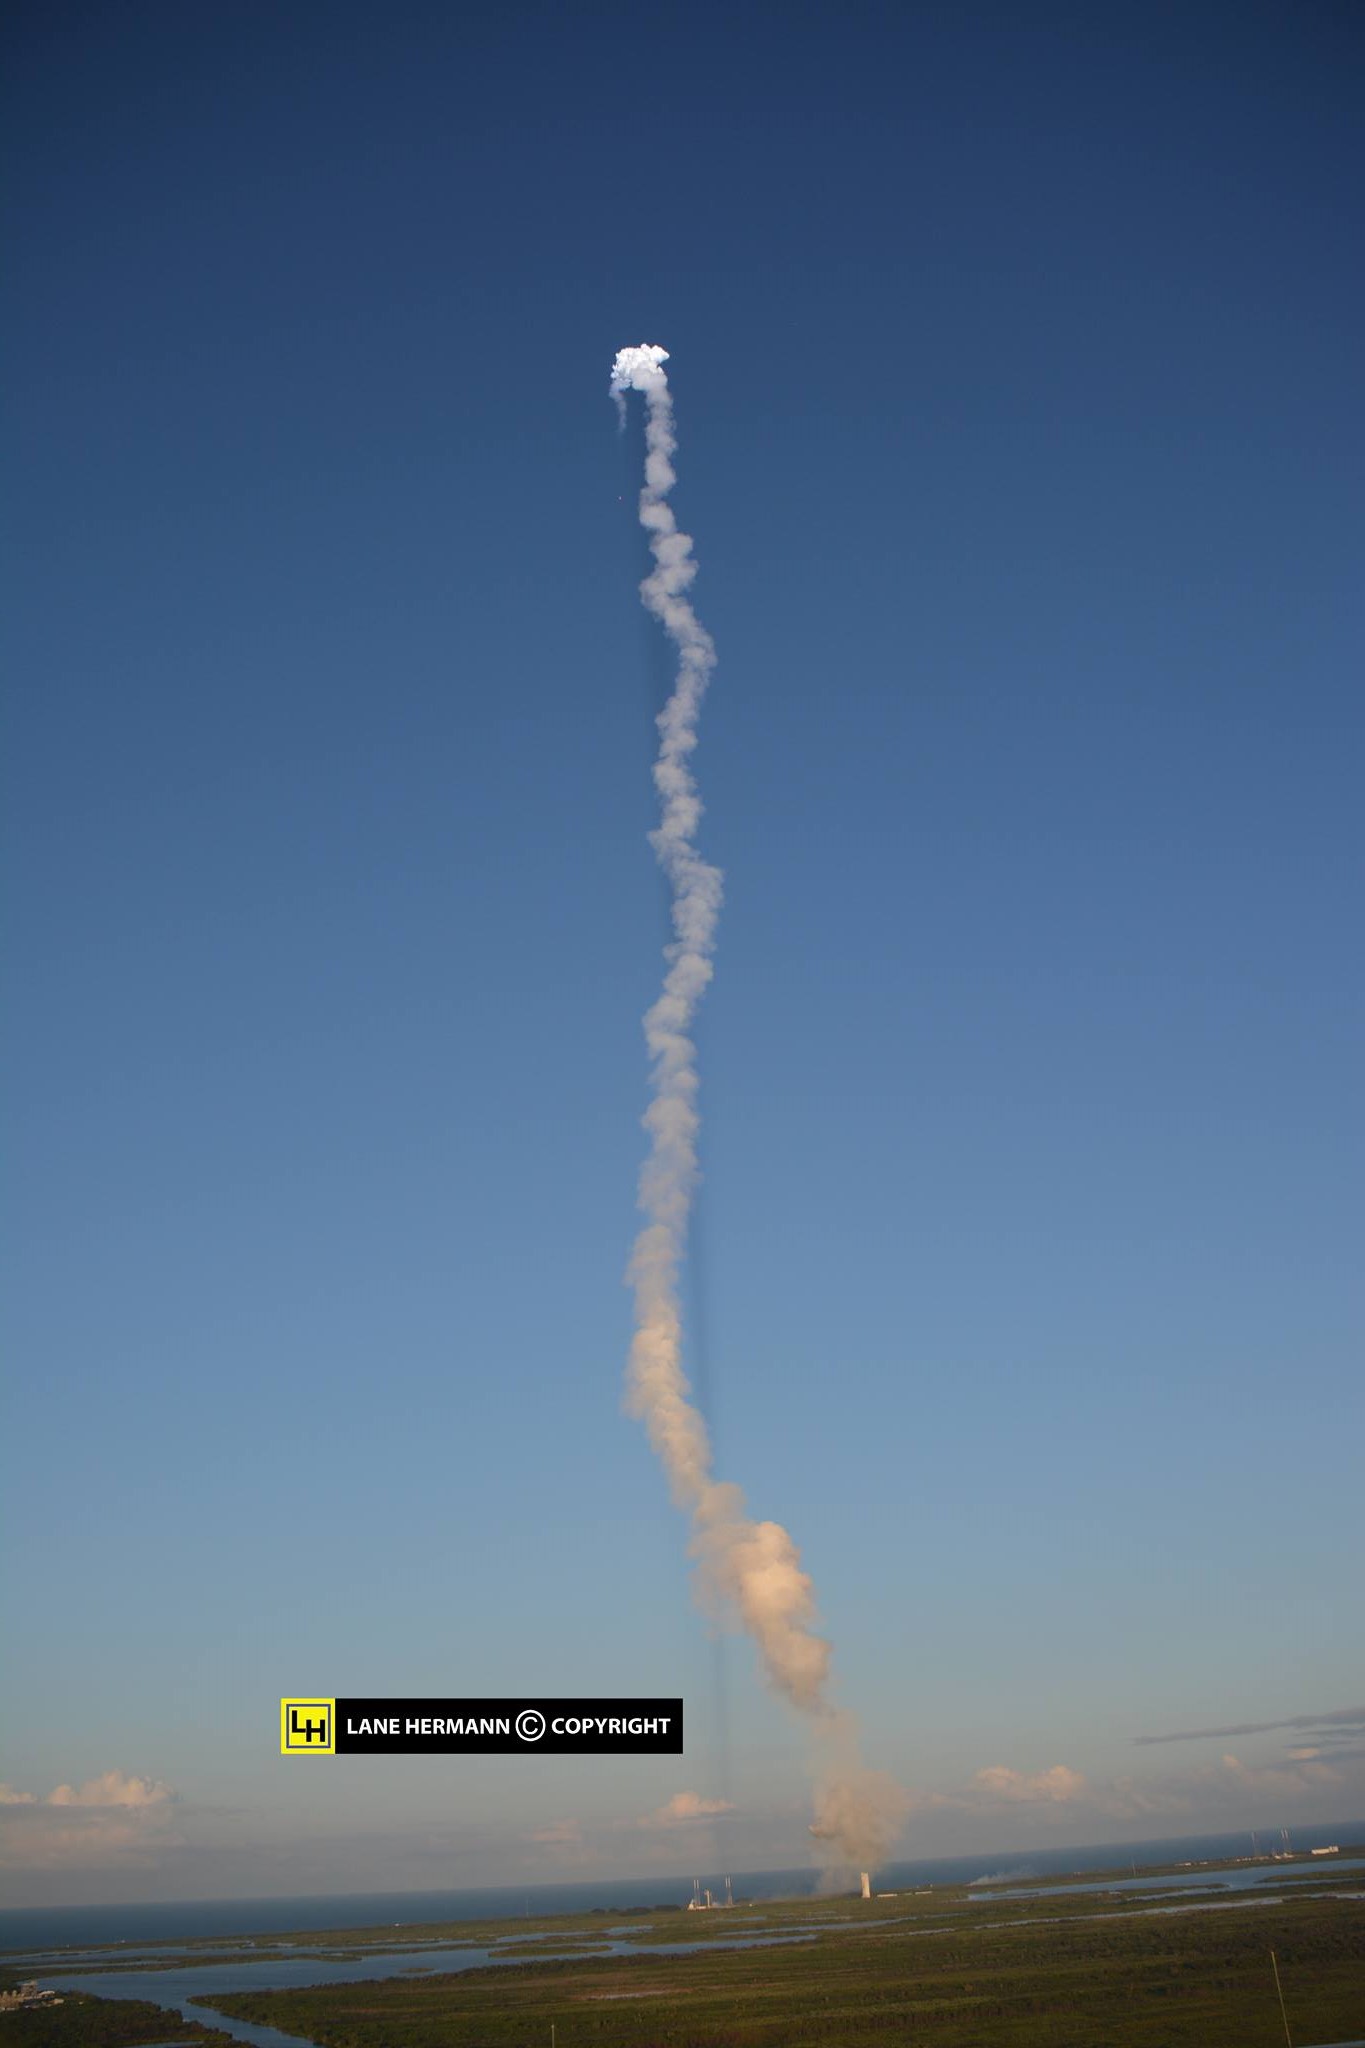 NASA’s OSIRIS-REx blasts off to asteroid Bennu on ULA Atlas V rocket prior on Sept. 8, 2016 from Space Launch Complex 41 on Cape Canaveral Air Force Station, FL, as seen from the VAB roof.  Credit: Lane Hermann/SpaceHeadNews 